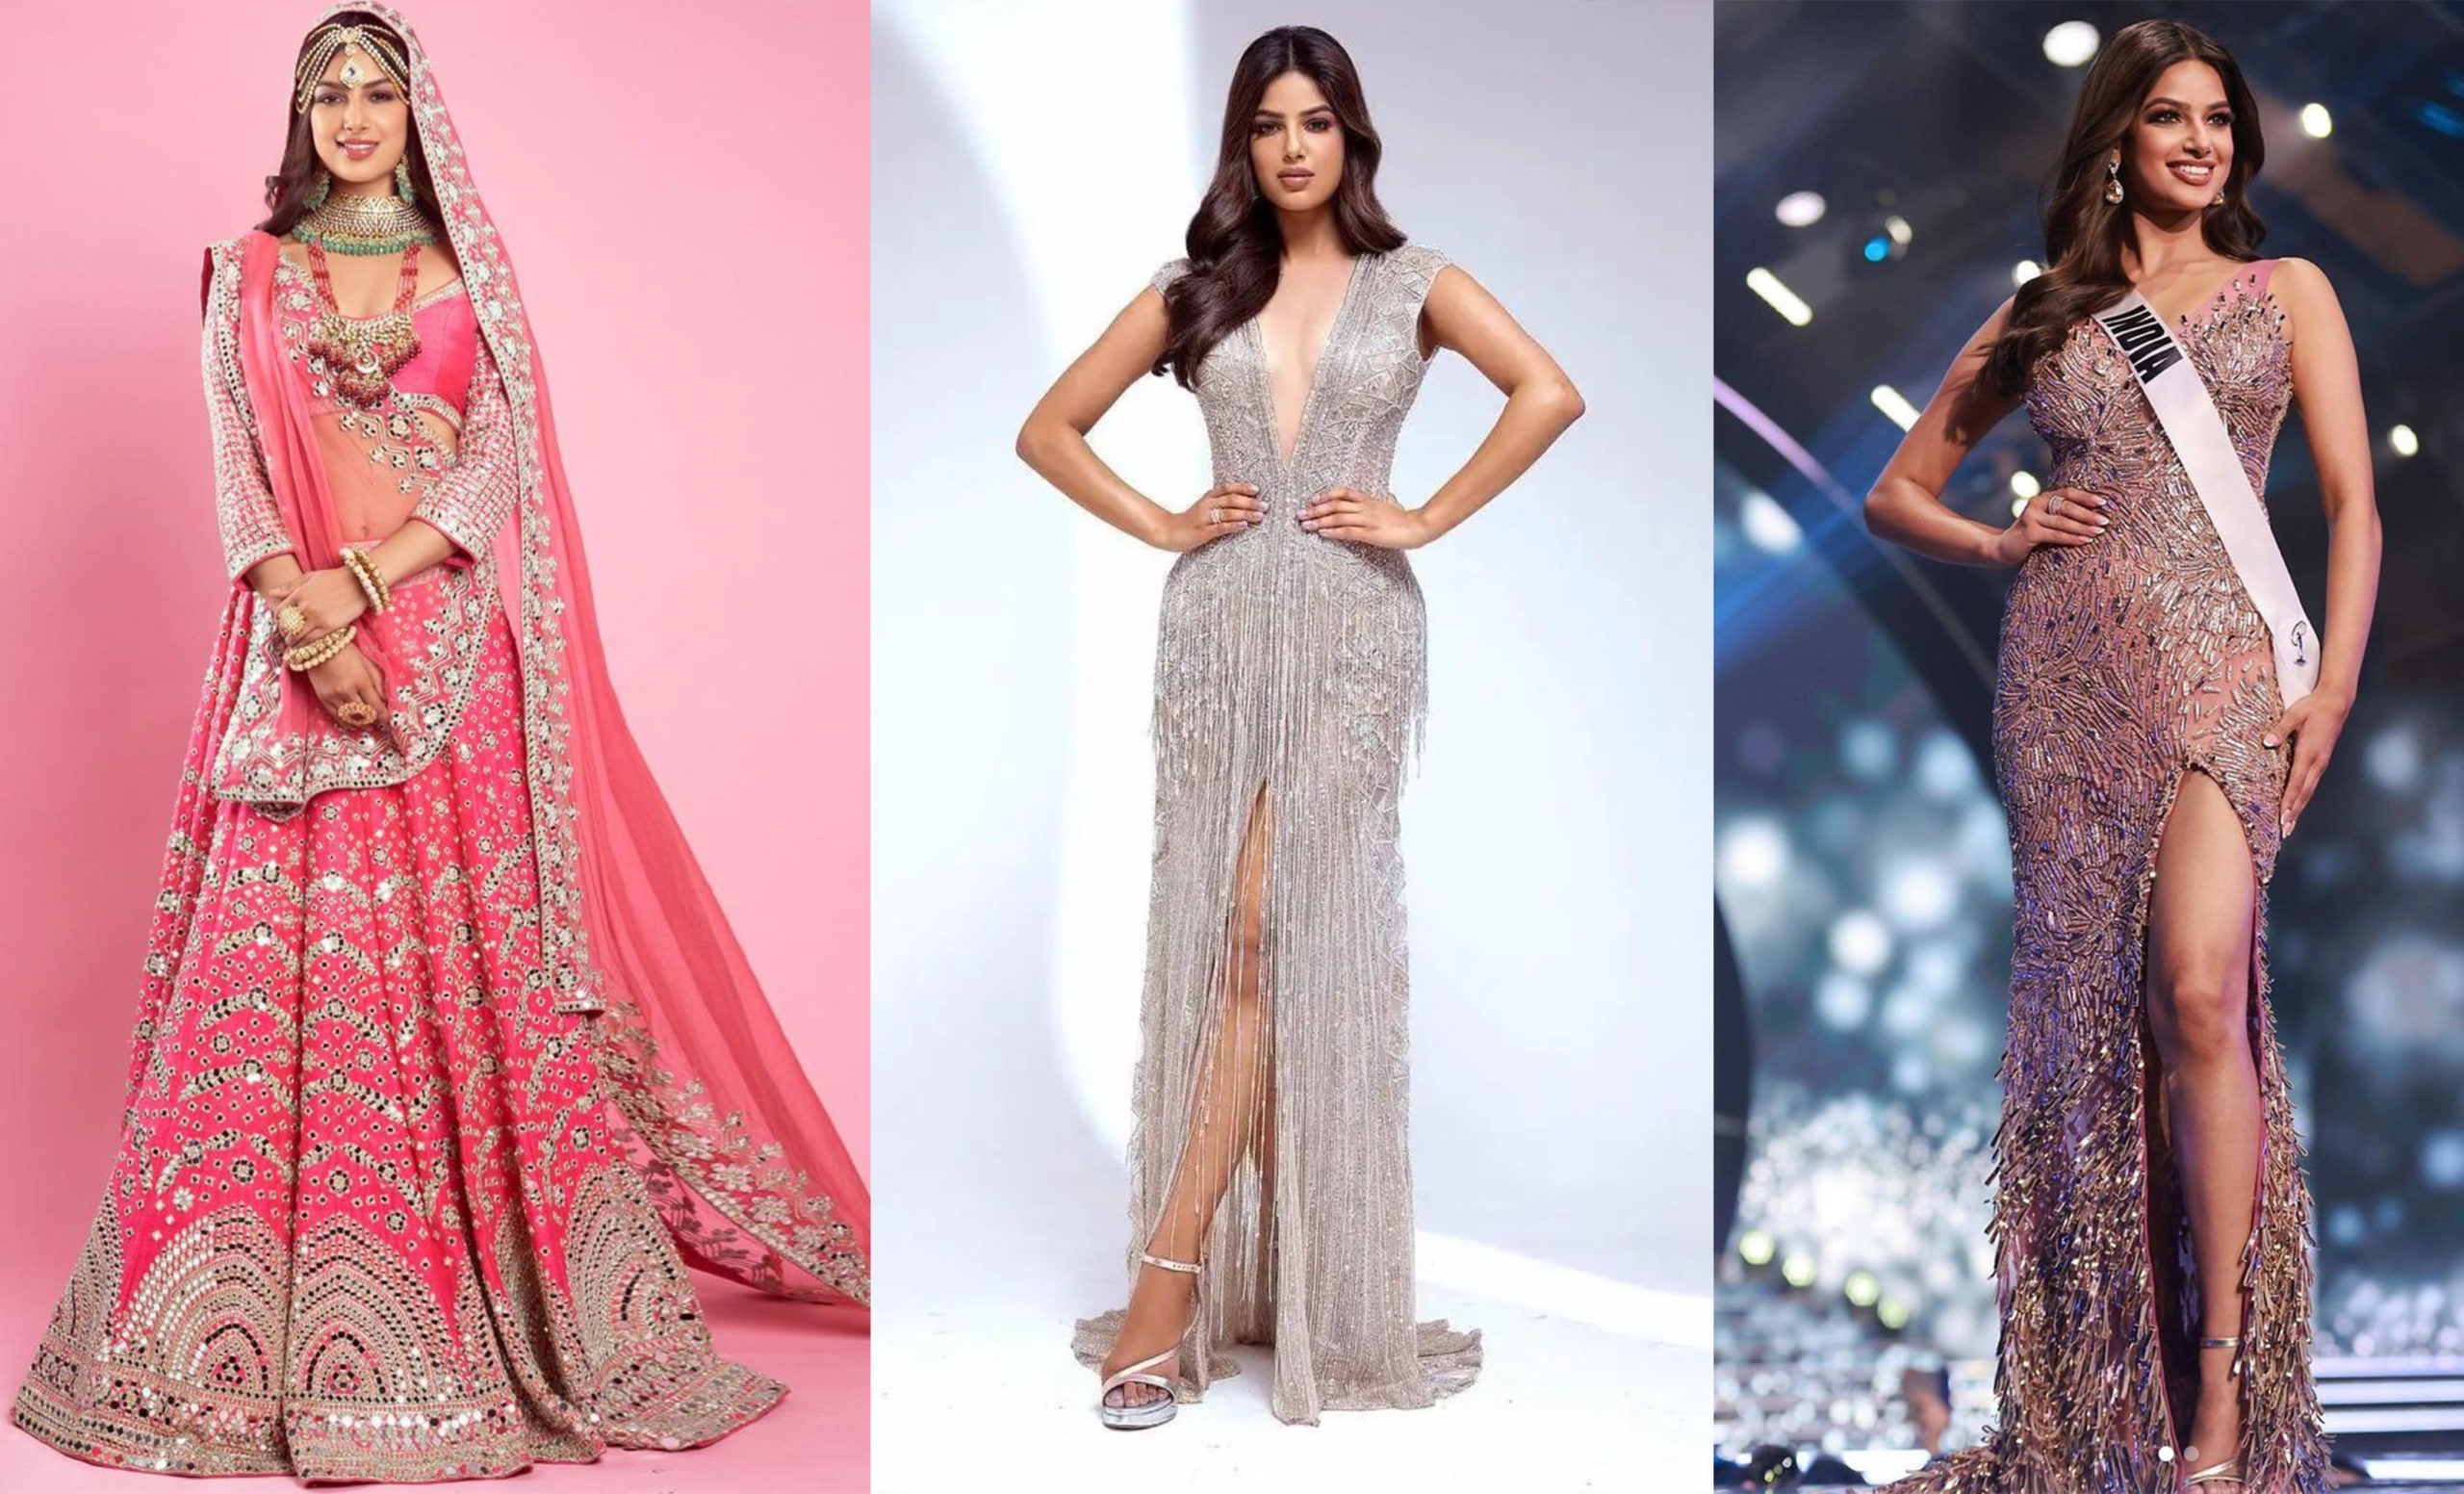 Harnaaz Sandhu Wore Saisha Shinde’s ‘Winning Silver Gown’ To Miss Universe 2021, And It’s Got A Special Message